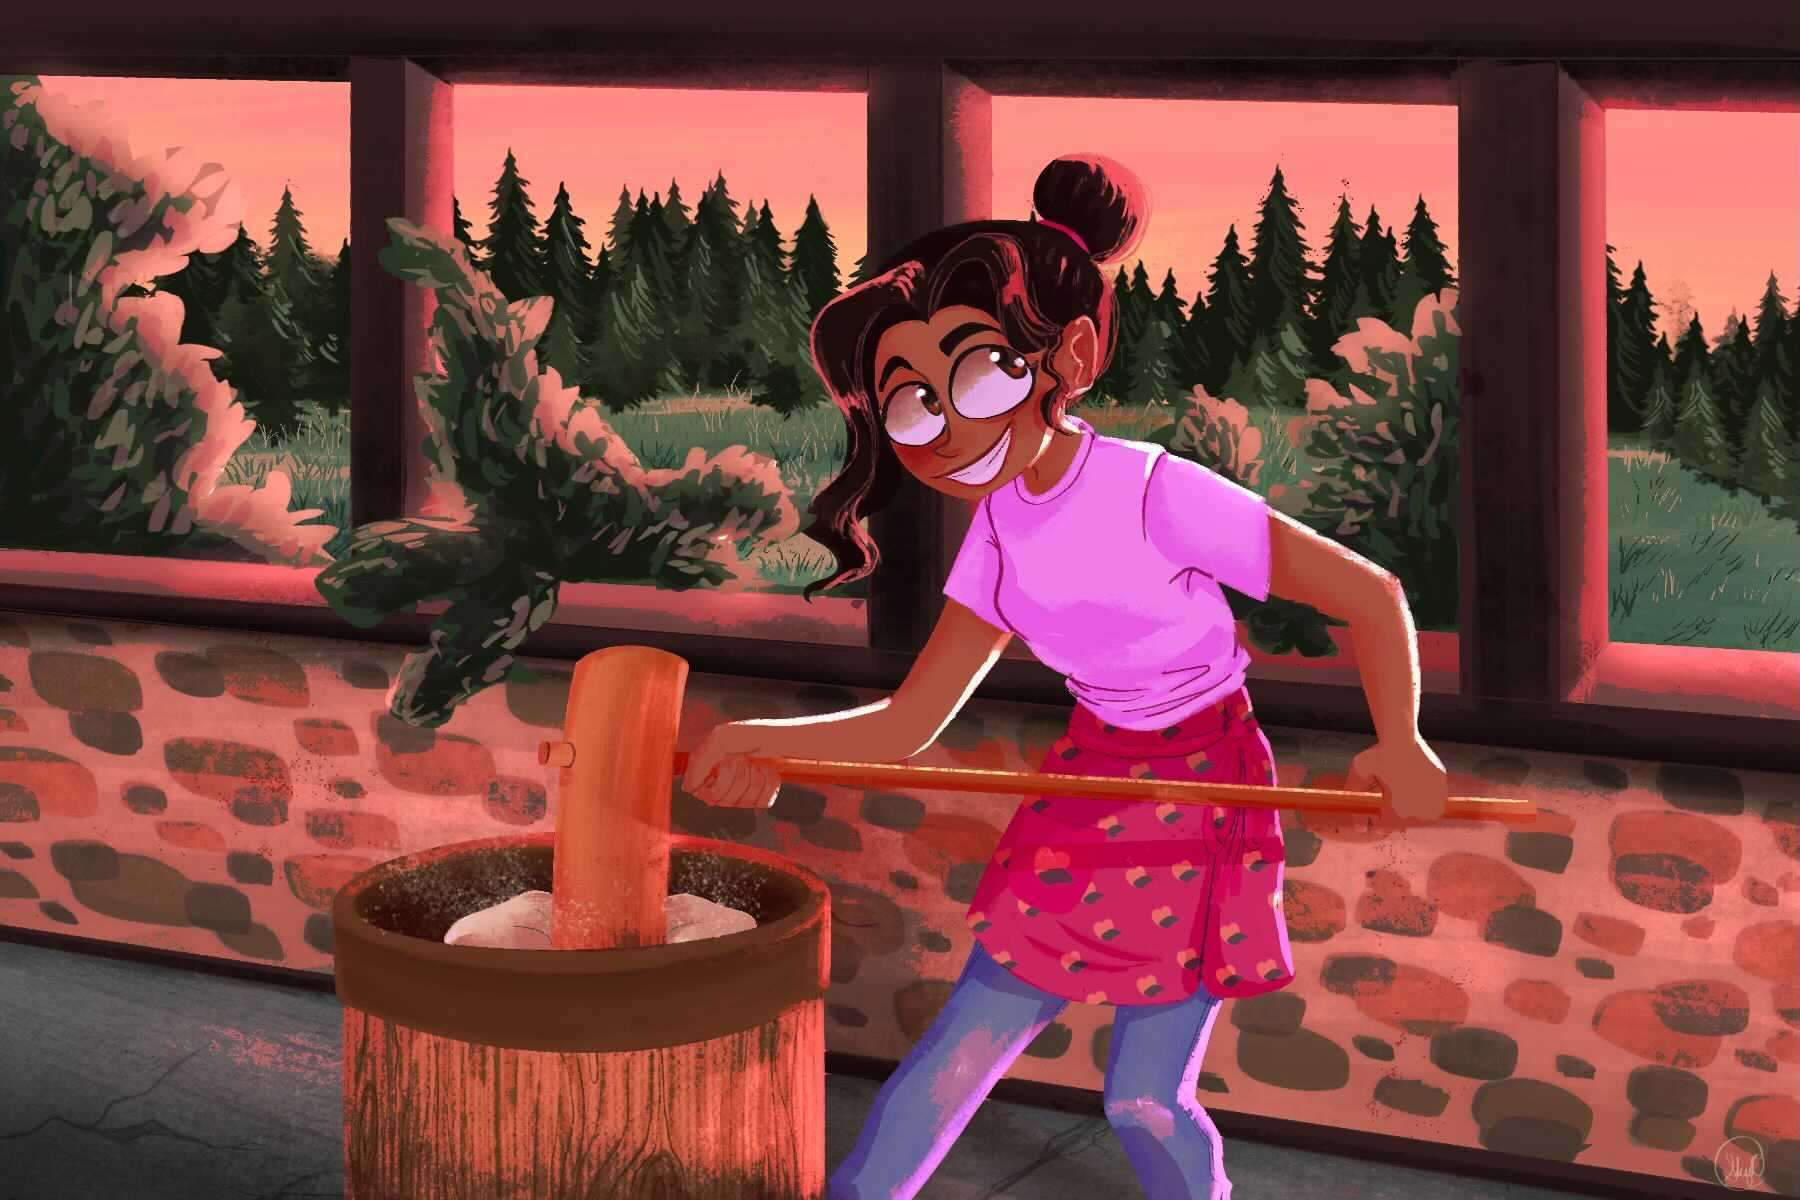 Illustration of a young girl making mochi